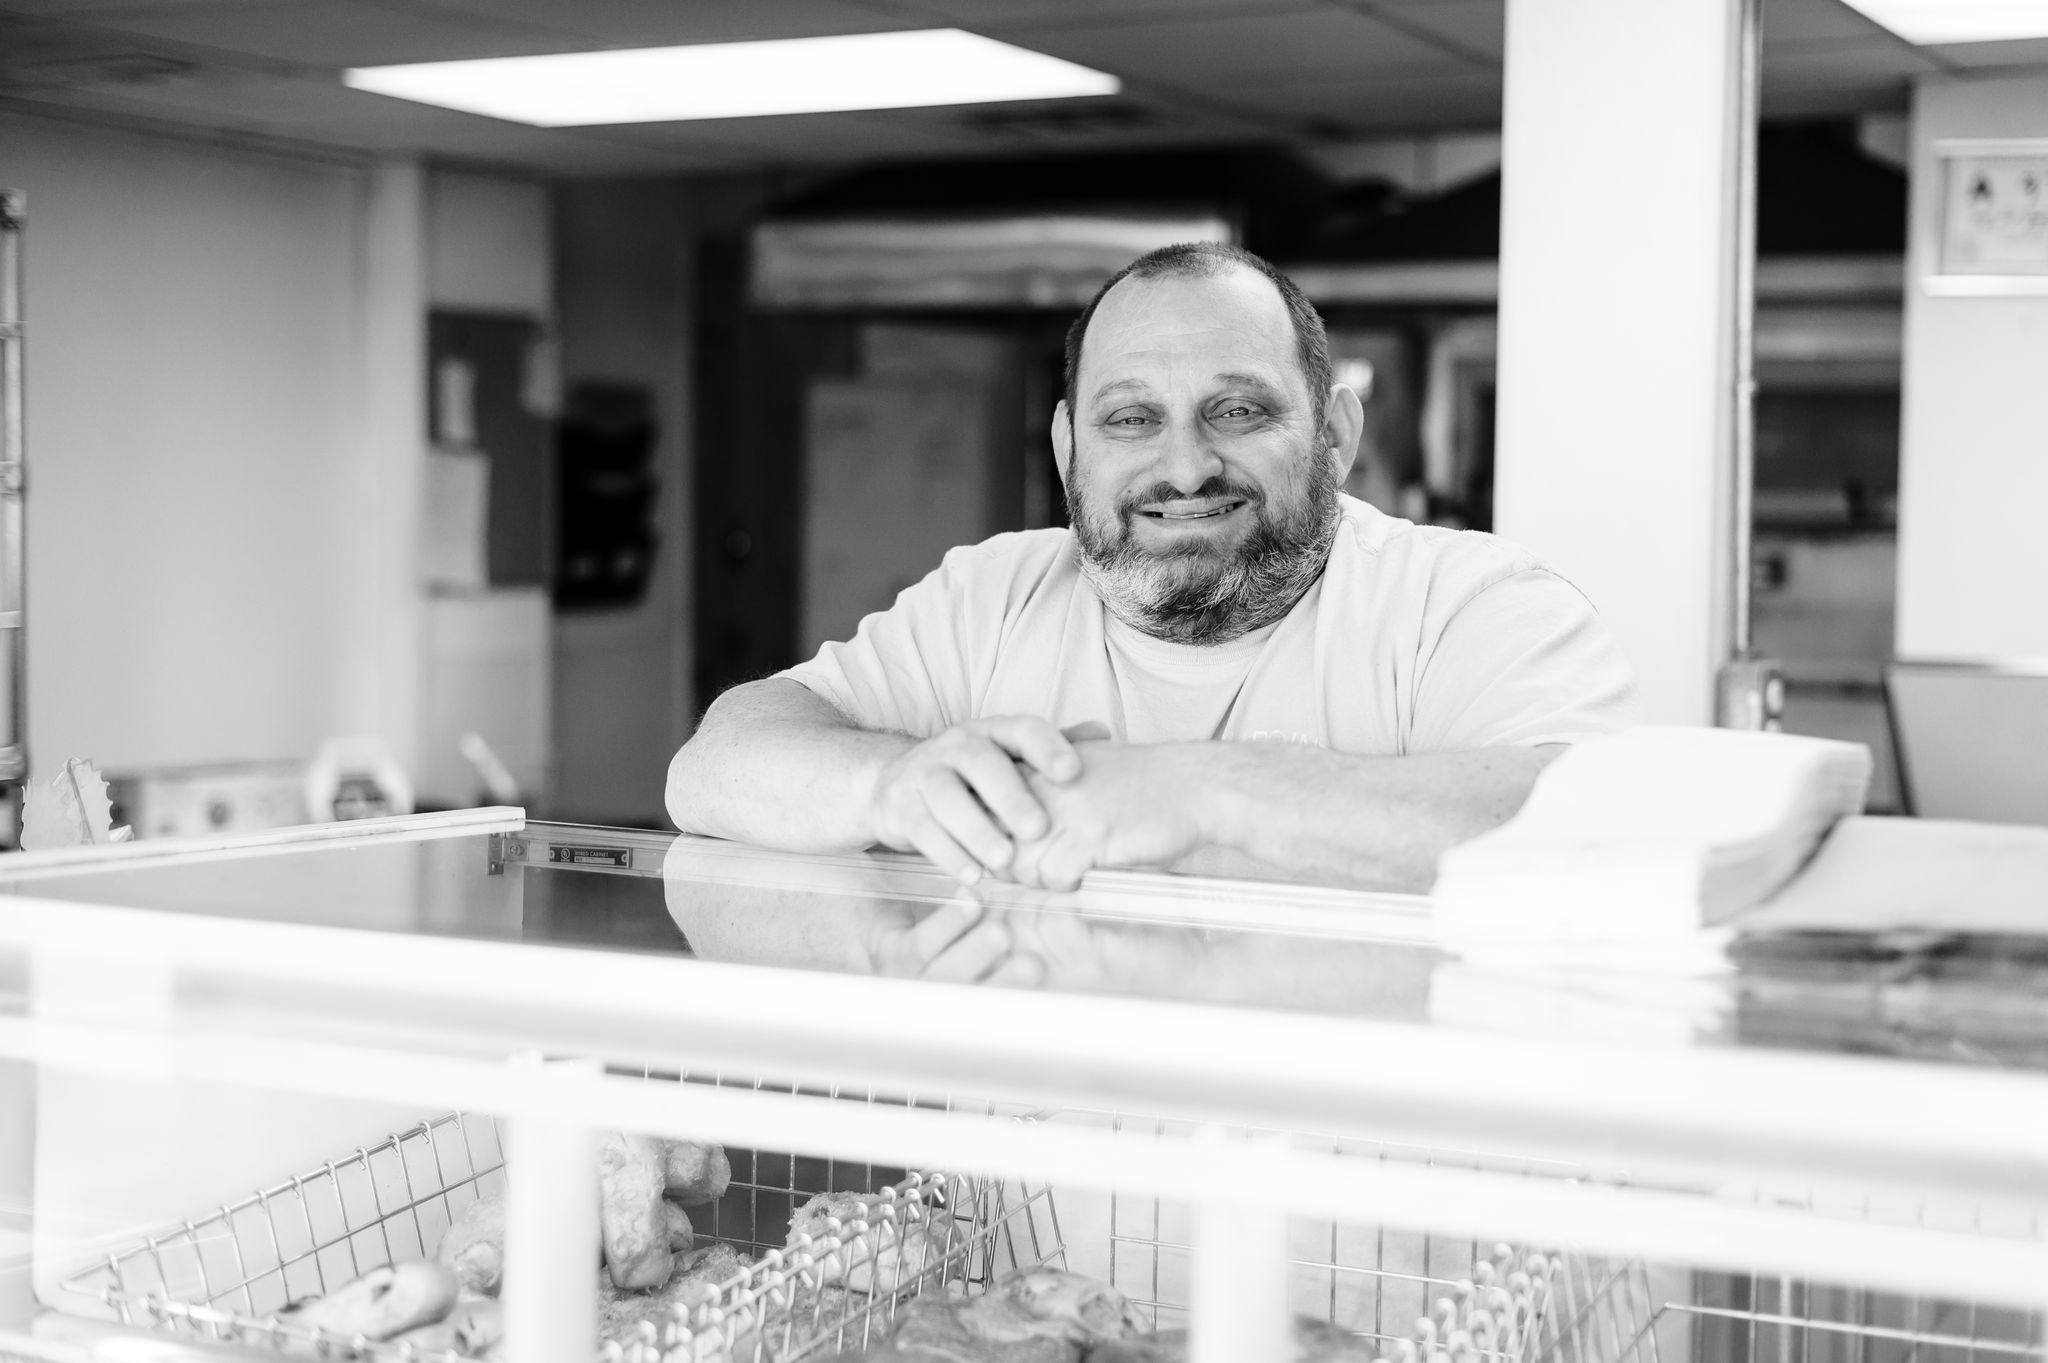 Mat Greenberg, owner of High Point Bagels, smiles standing at the counter of his shop in High Point, NC.